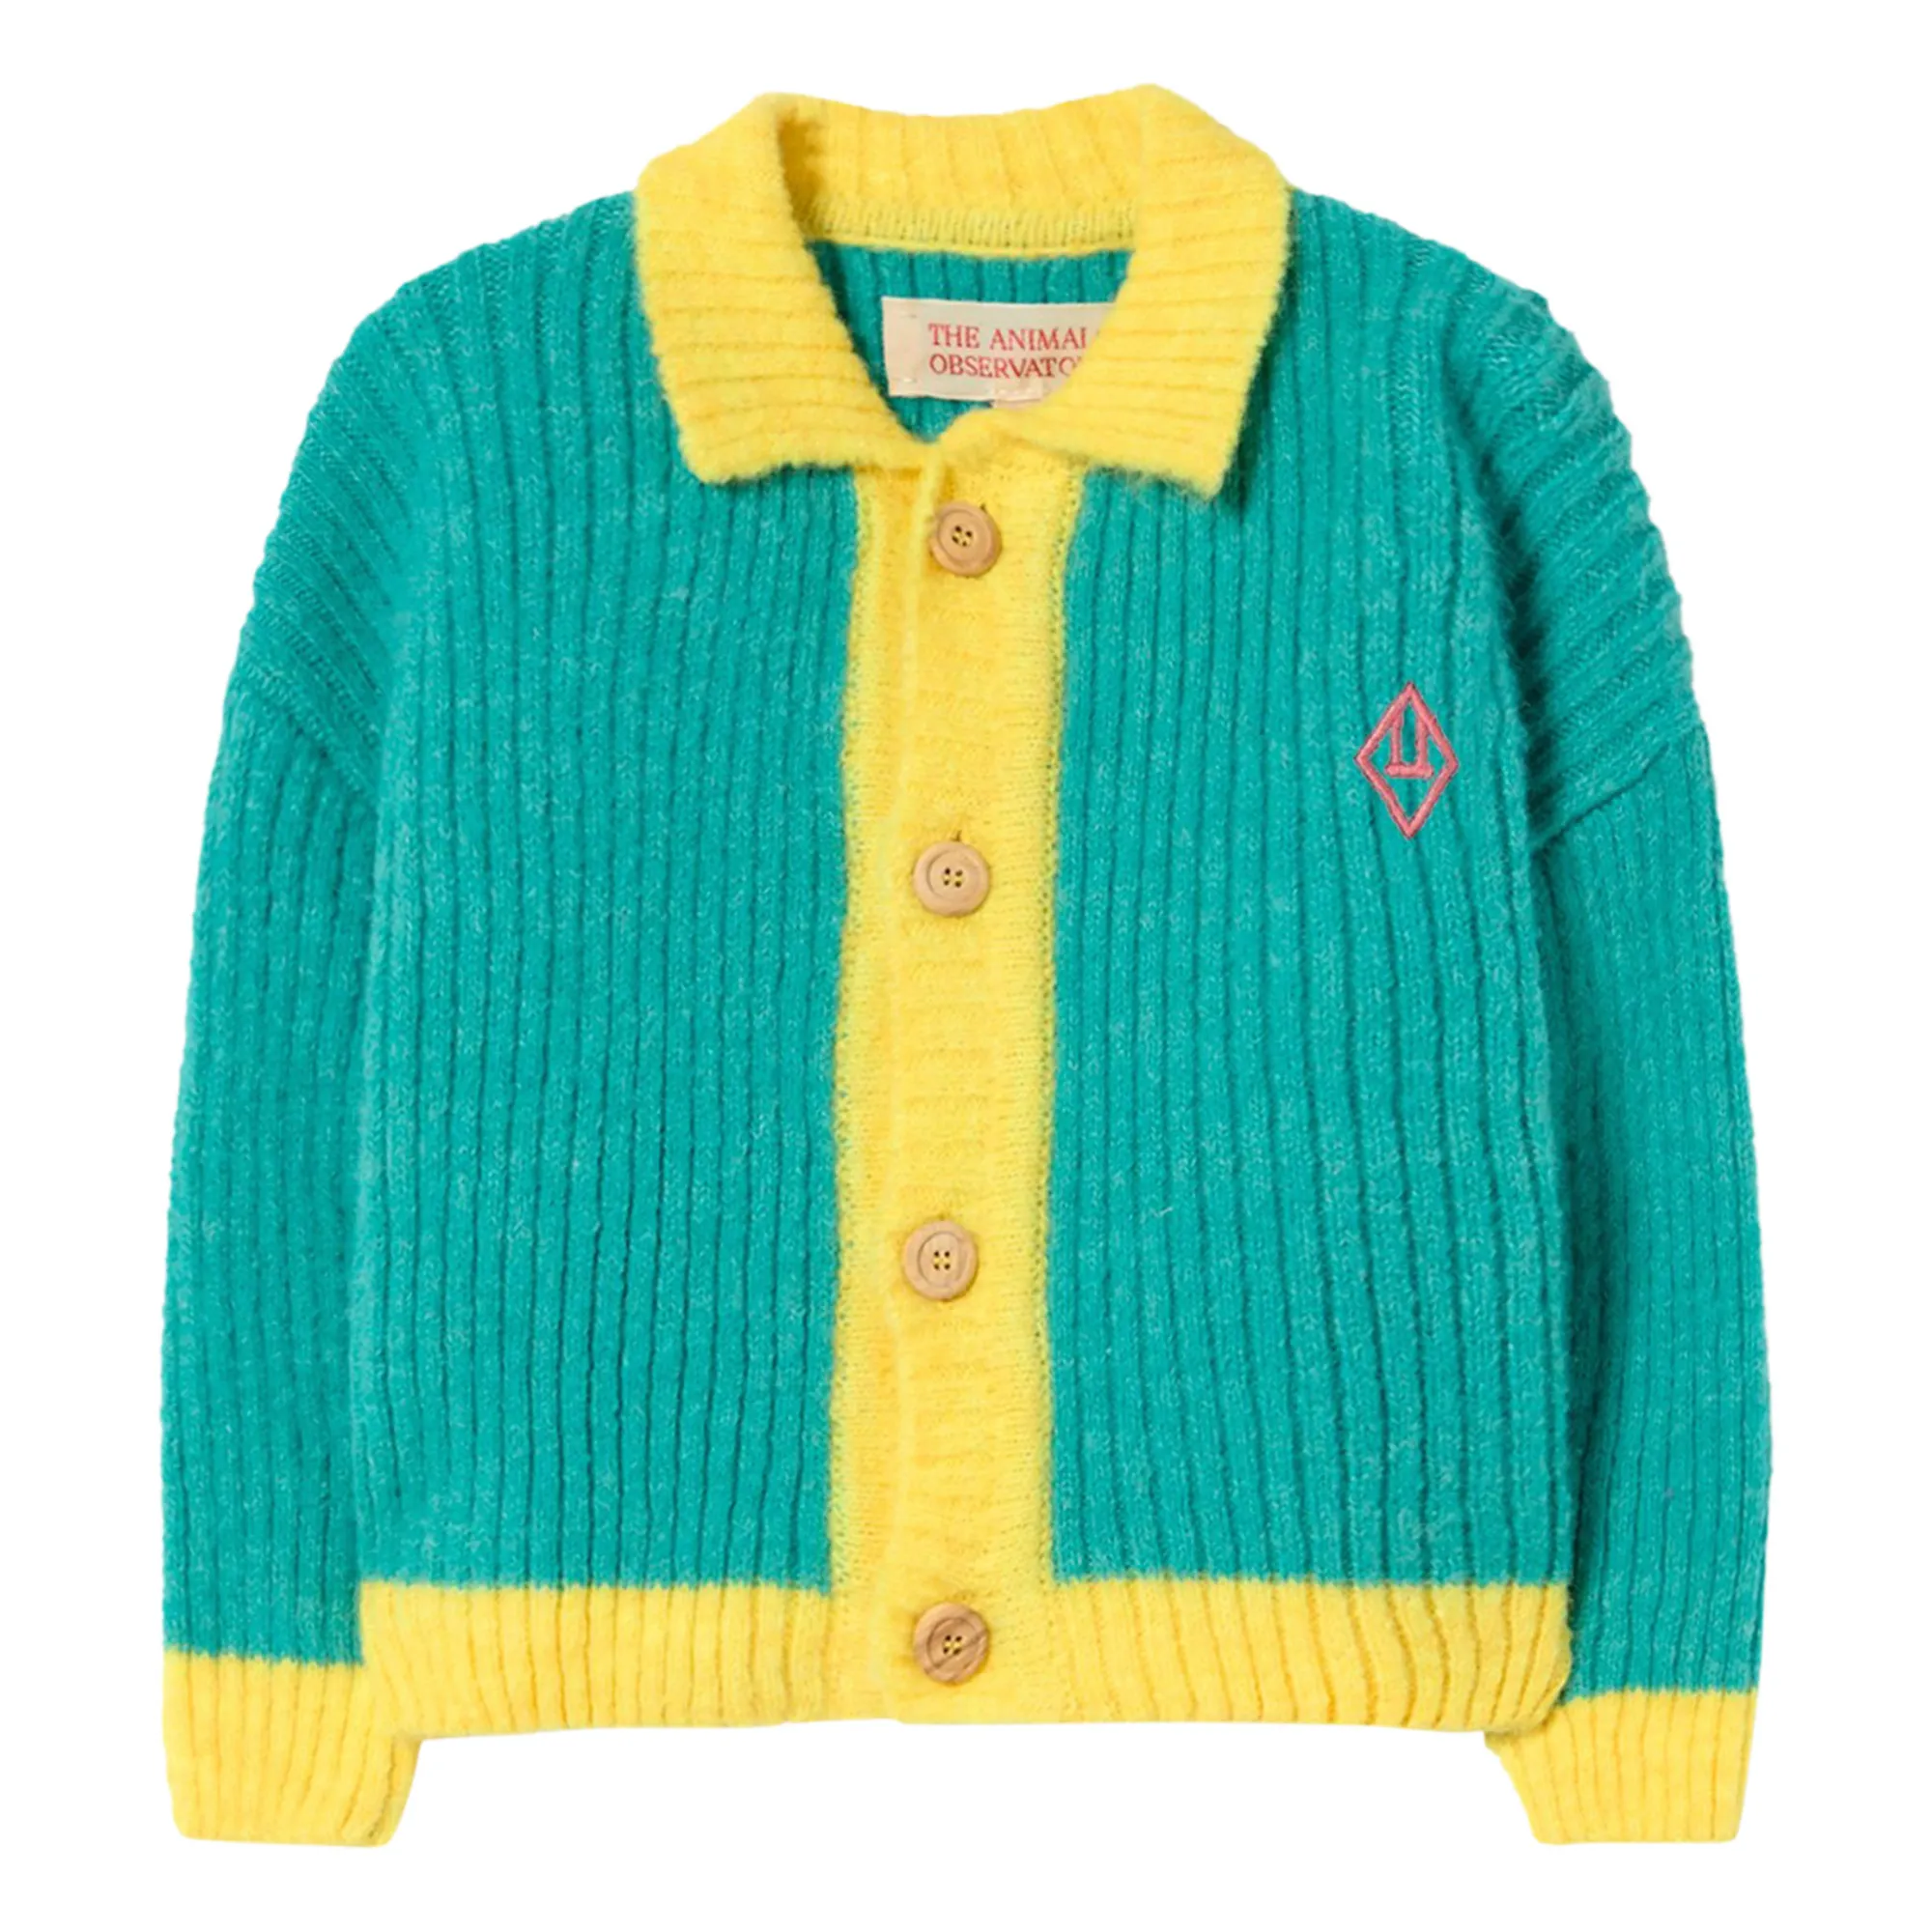 The Animals Observatory Toucan striped wool cardigan - Green